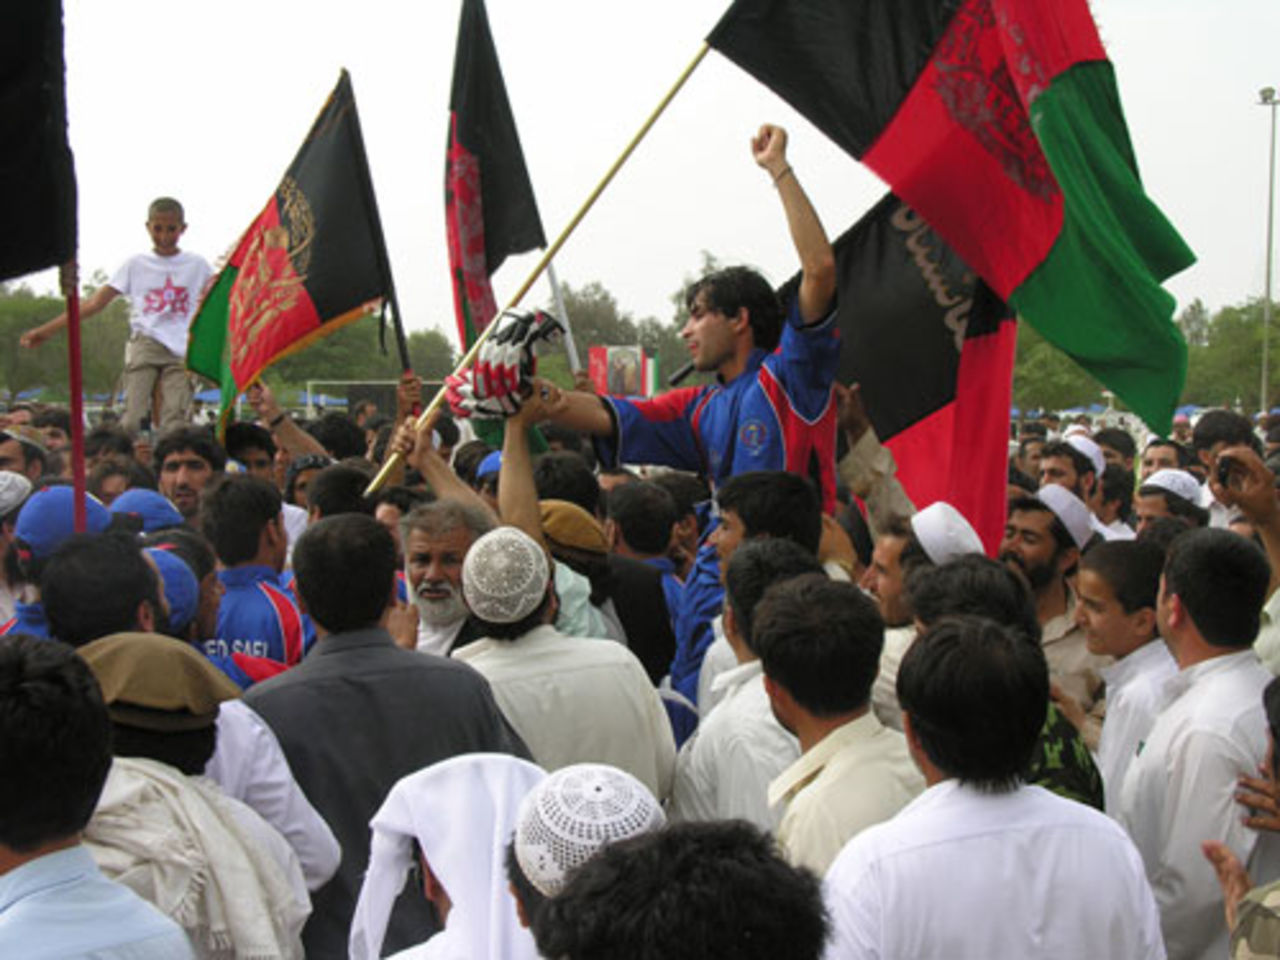 Man of the Match Aimal Wafa is lifted shoulder-high from the field, Afghanistan v Nepal, ACC Under-19 Elite Cup, Kuwait, April 29, 2009